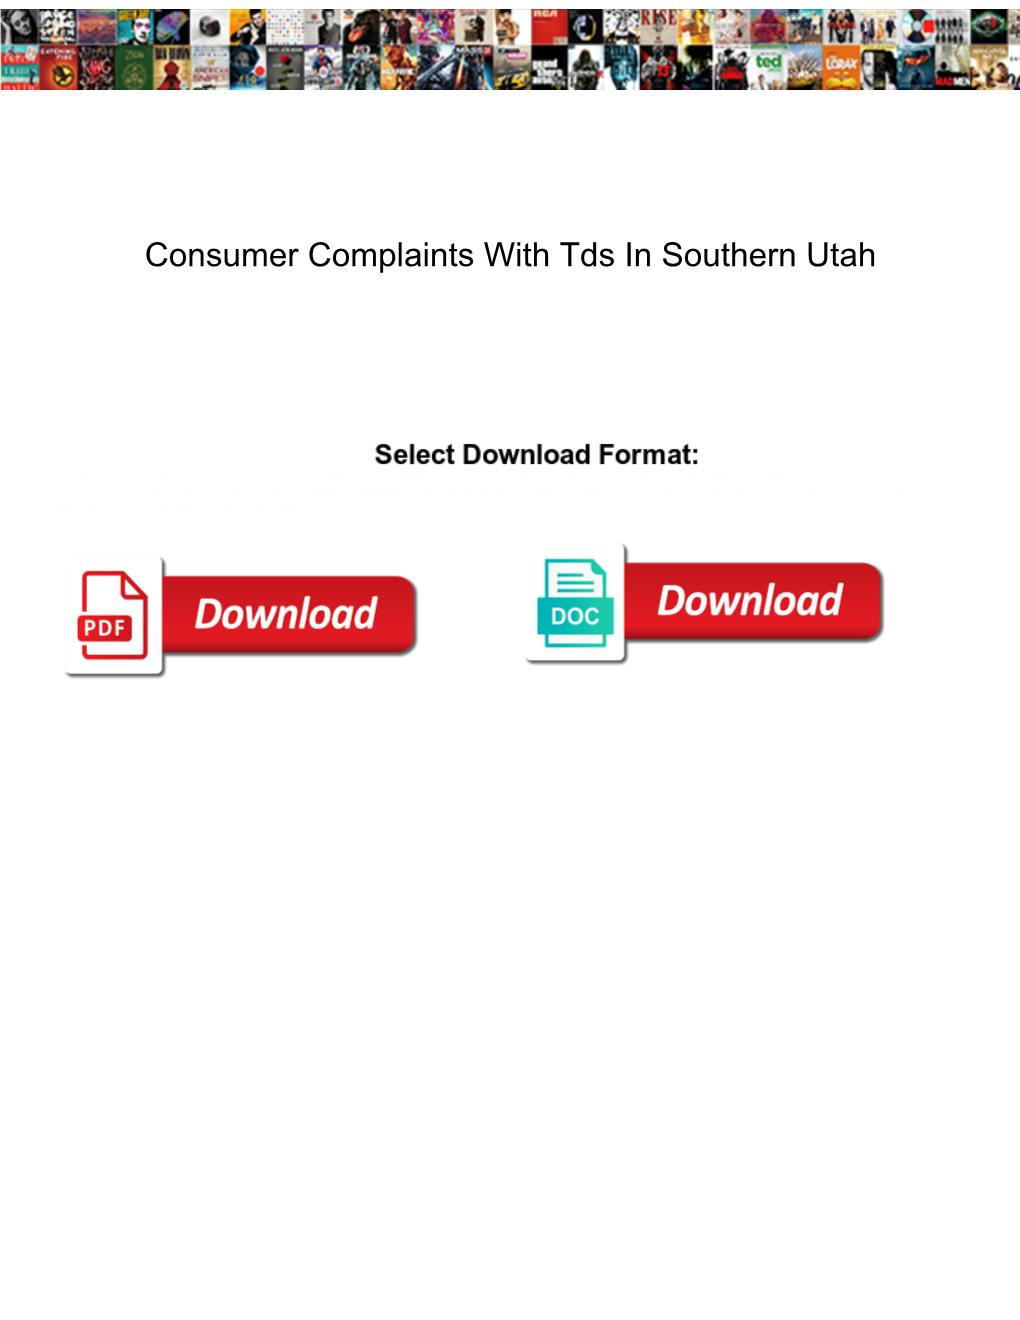 Consumer Complaints with Tds in Southern Utah